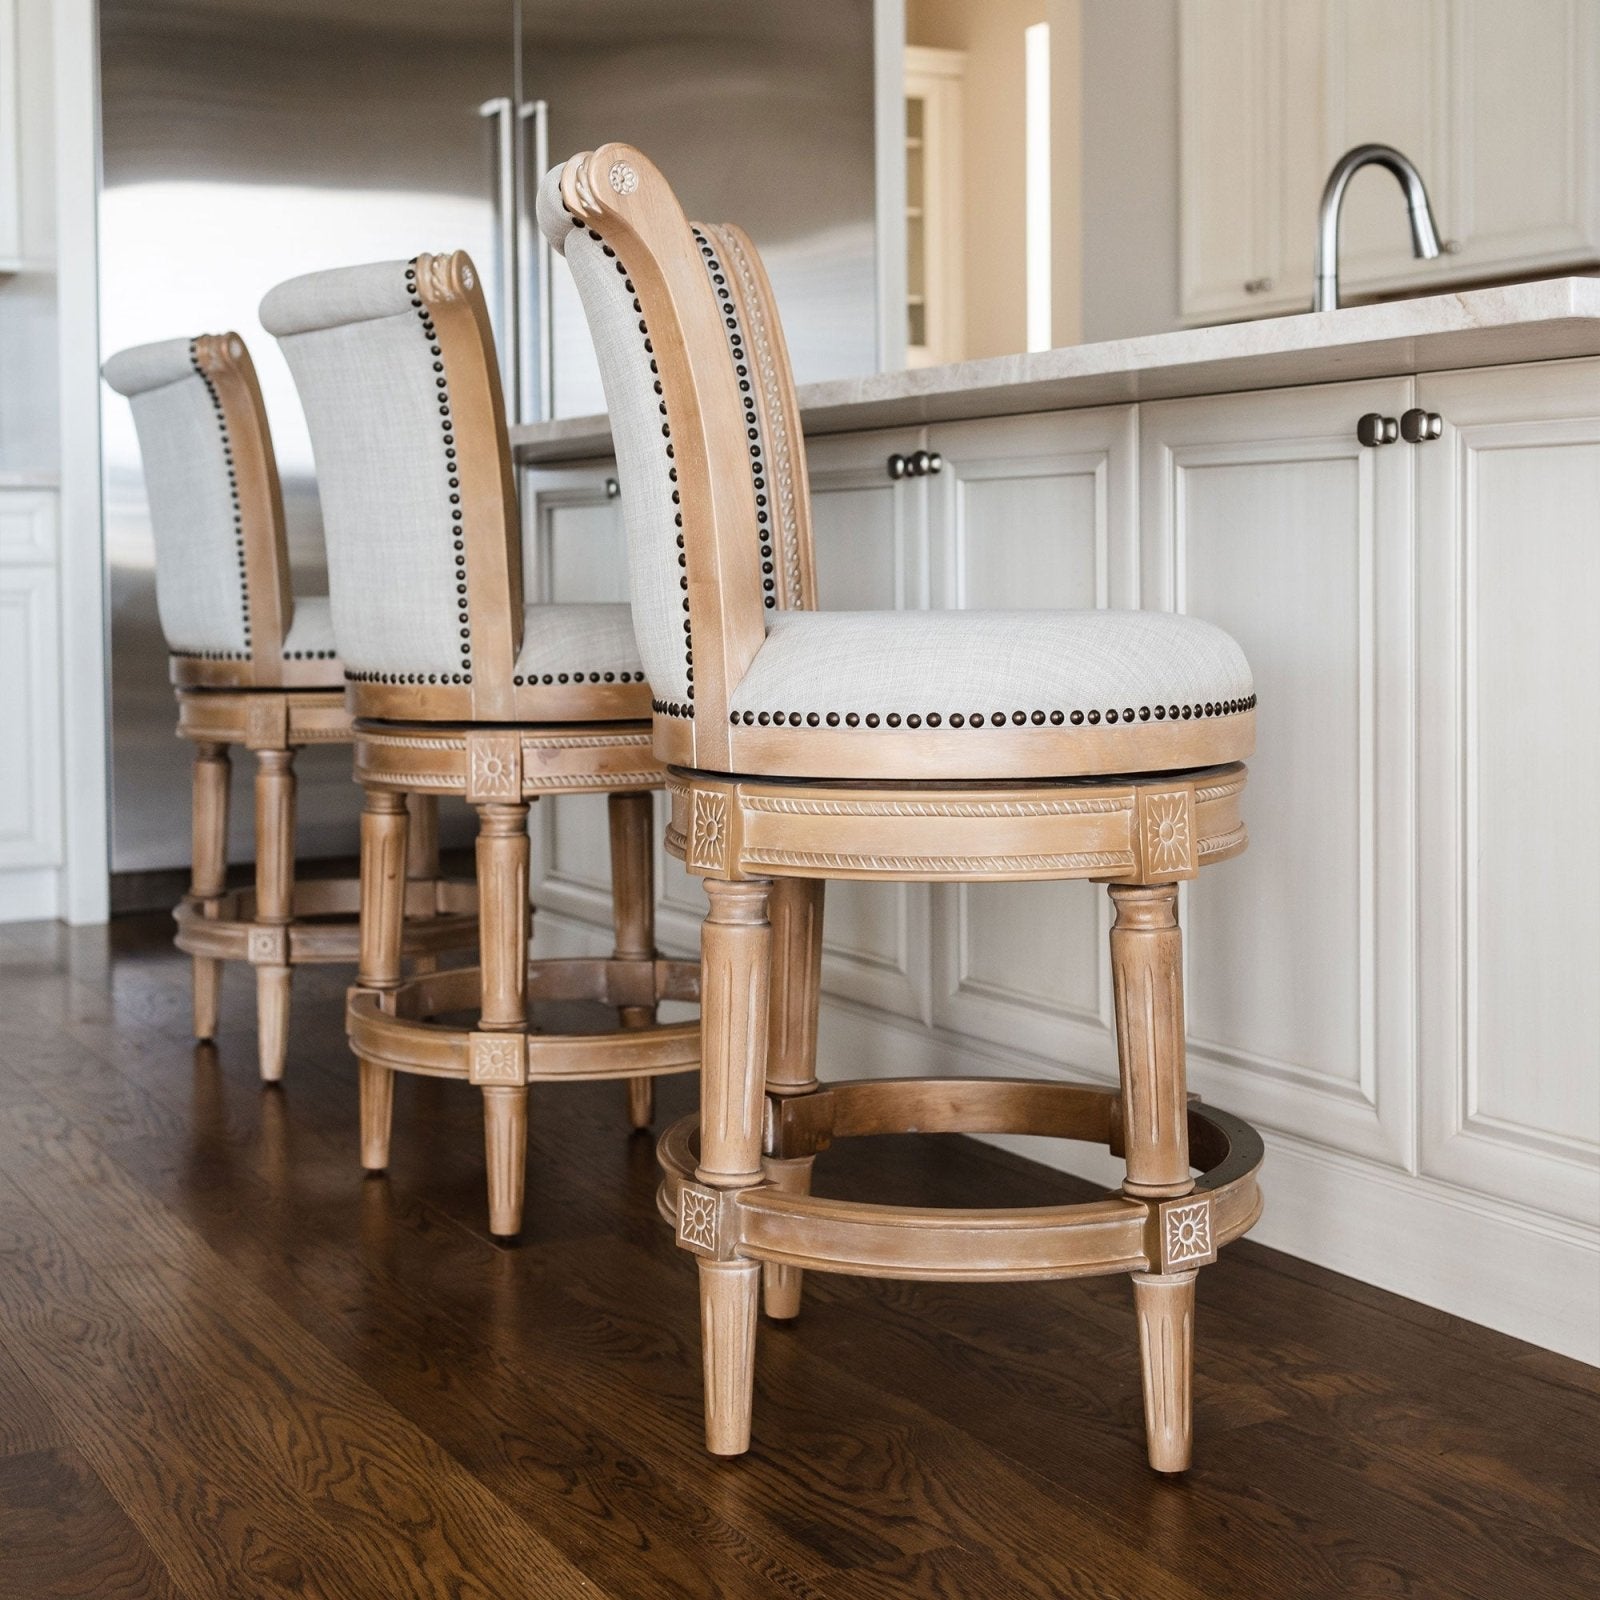 Pullman Counter Stool in Weathered Oak Finish with Sand Color Fabric Upholstery in Stools by Maven Lane